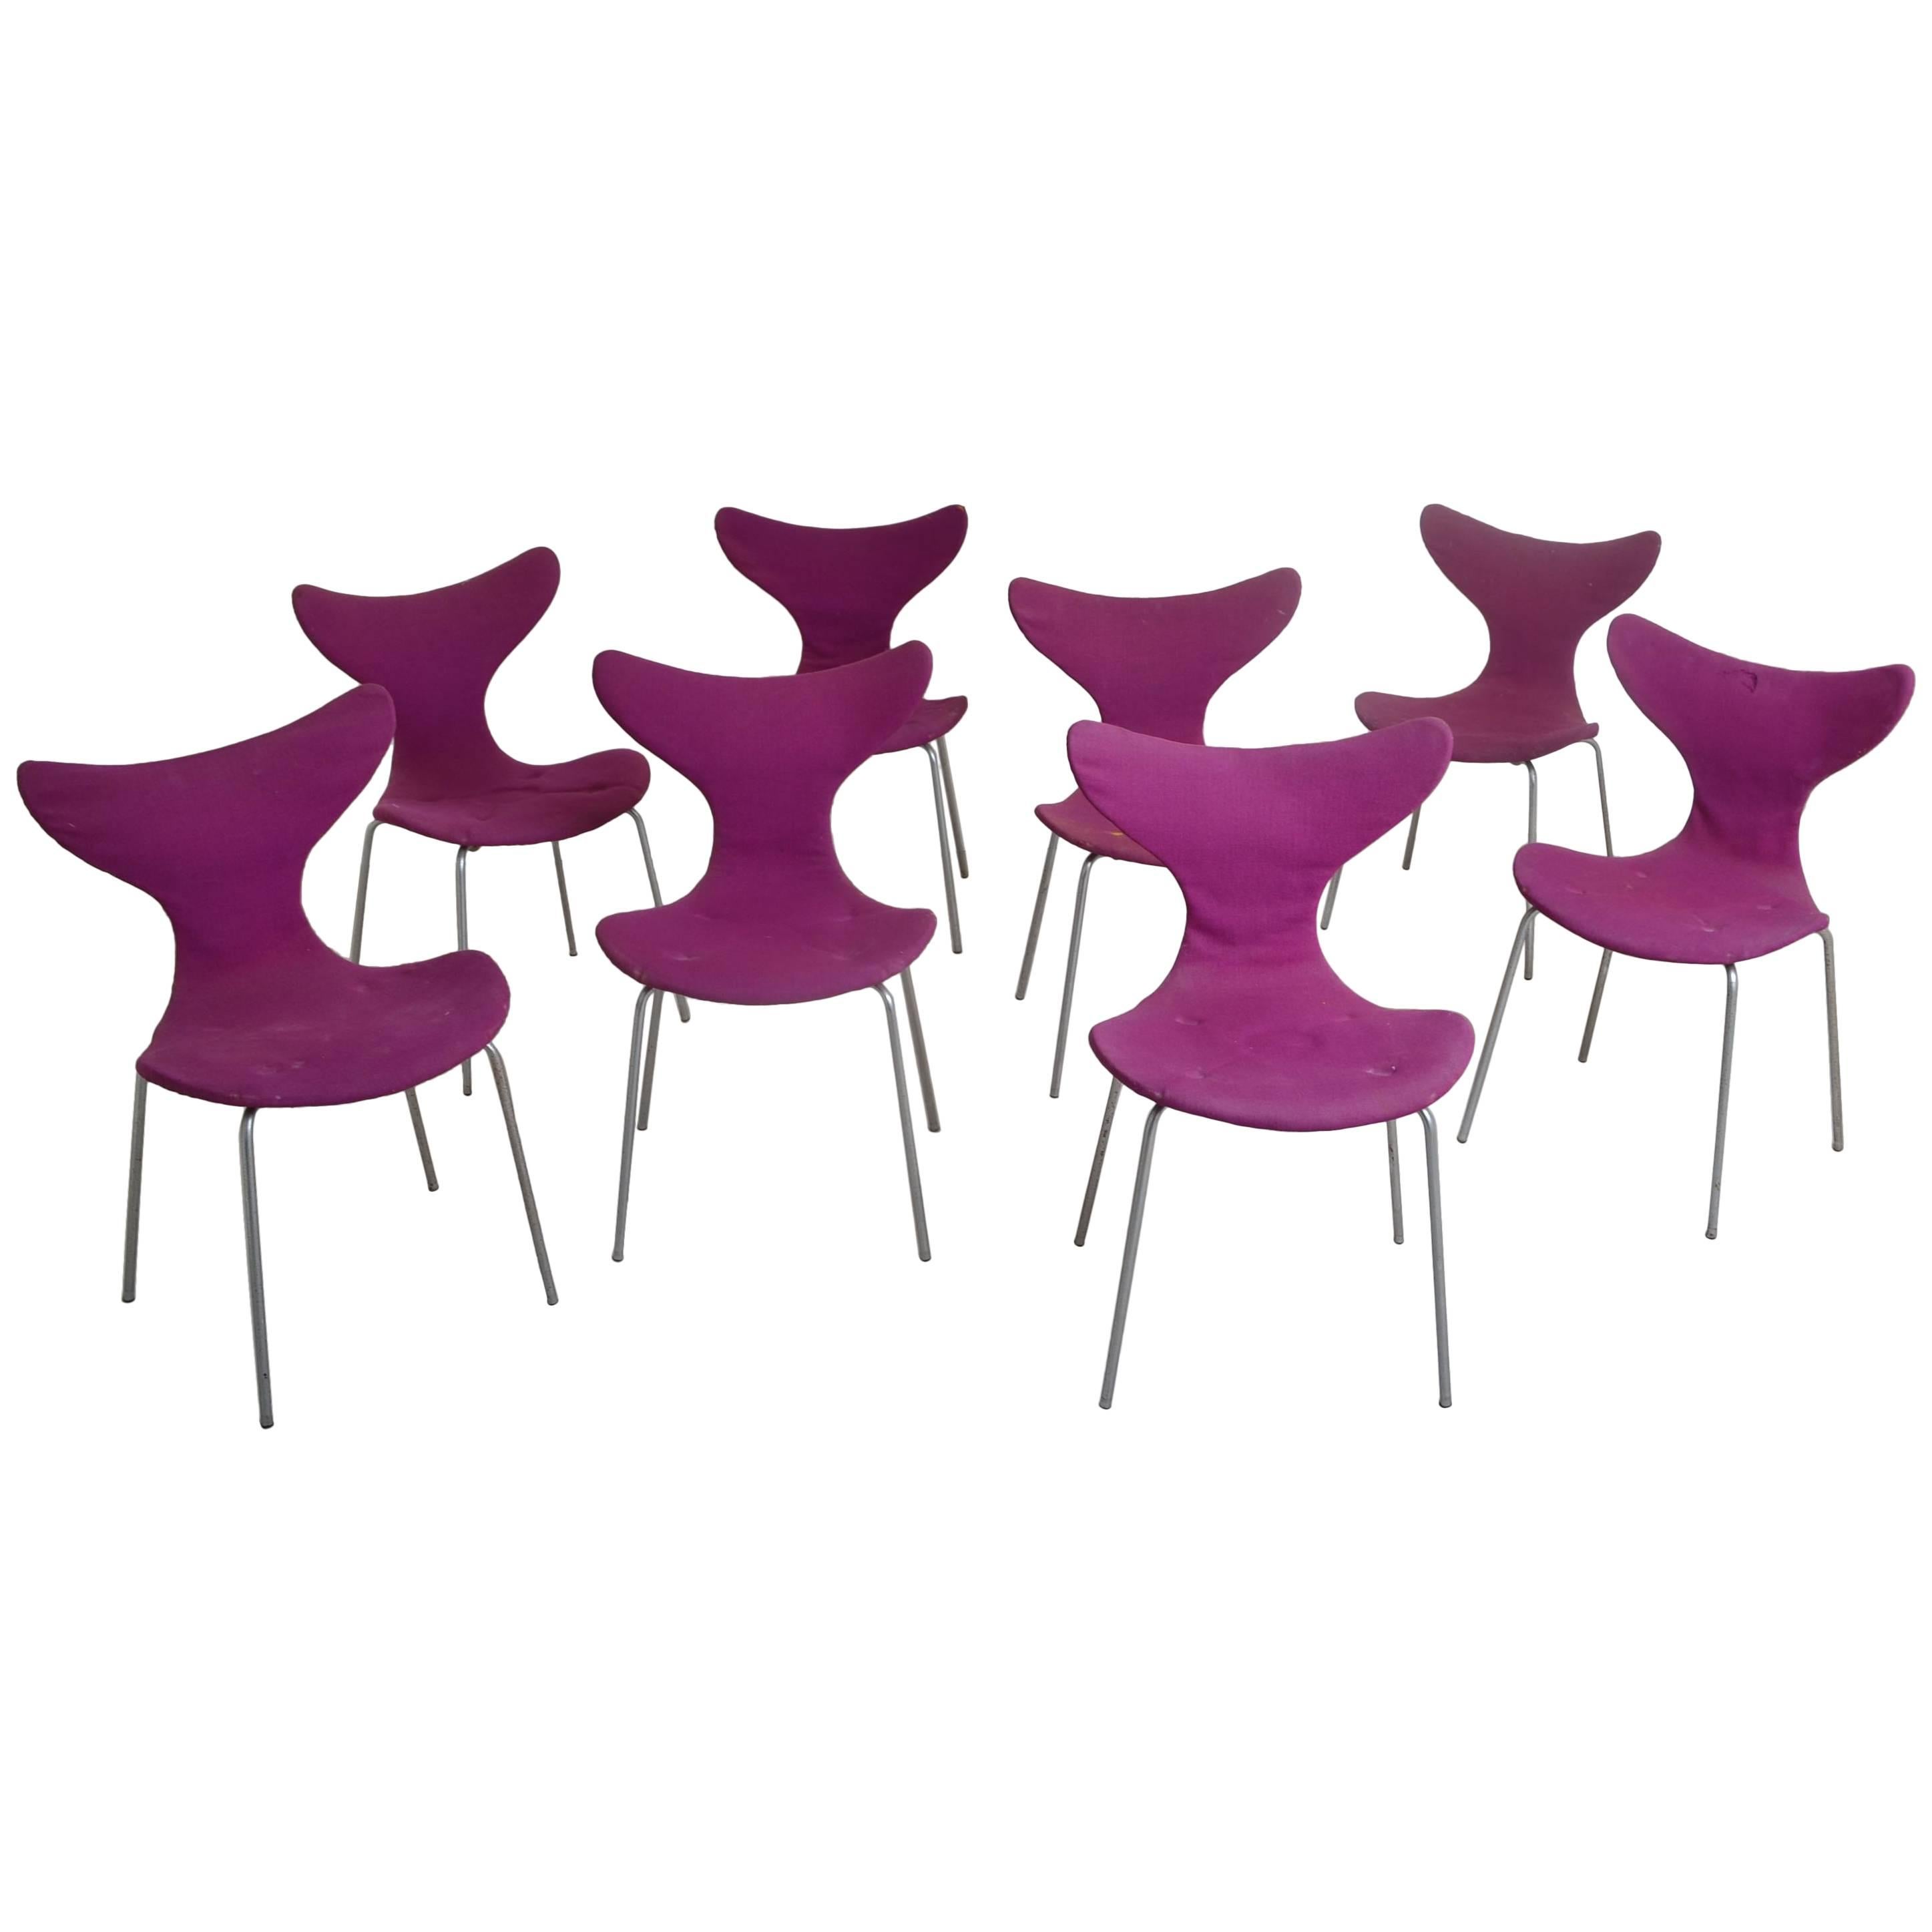 Eight Arne Jacobsen Lily Chairs, Denmark, circa 1950 For Sale